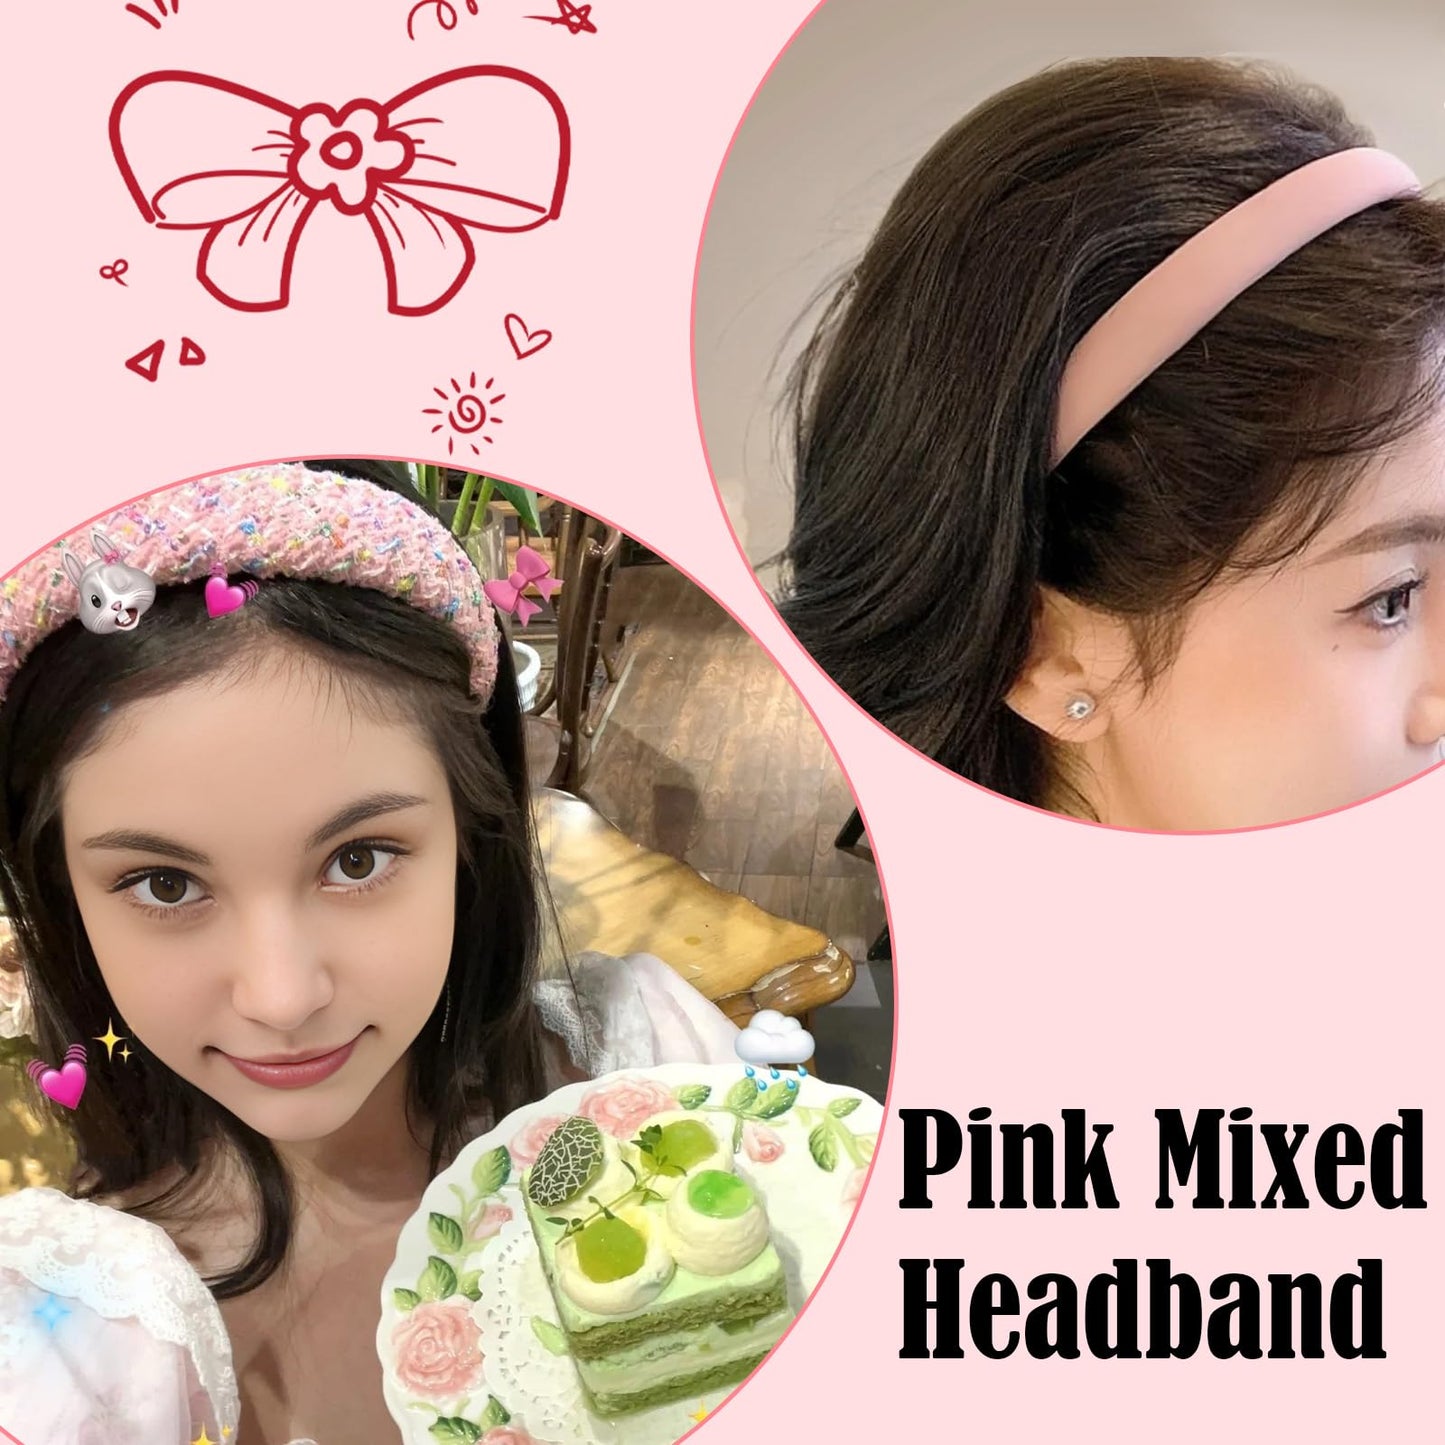 AUDTOPE 5Pcs Headbands for Women Girls, Cute Pearl Headband Padded Headbands for Women's Hair Nonslip Wide Hair Band Hoops Fashion Hair Accessories for Women Birthday Gifts (Pink)